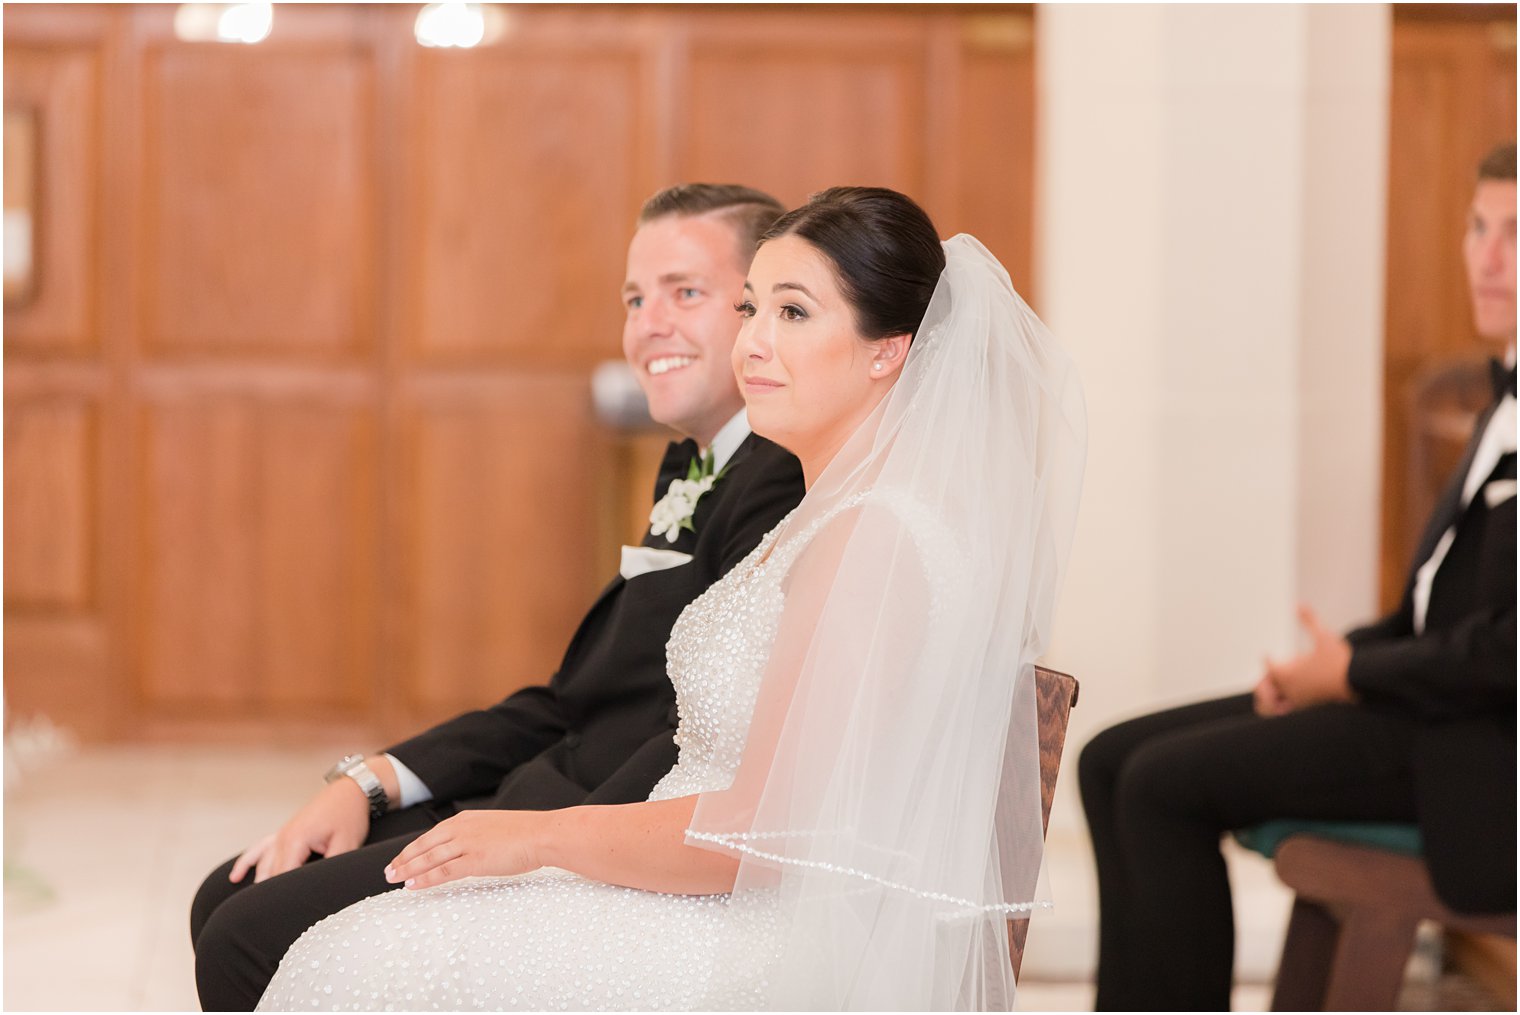 newlyweds sit during traditional wedding ceremony at St. James church